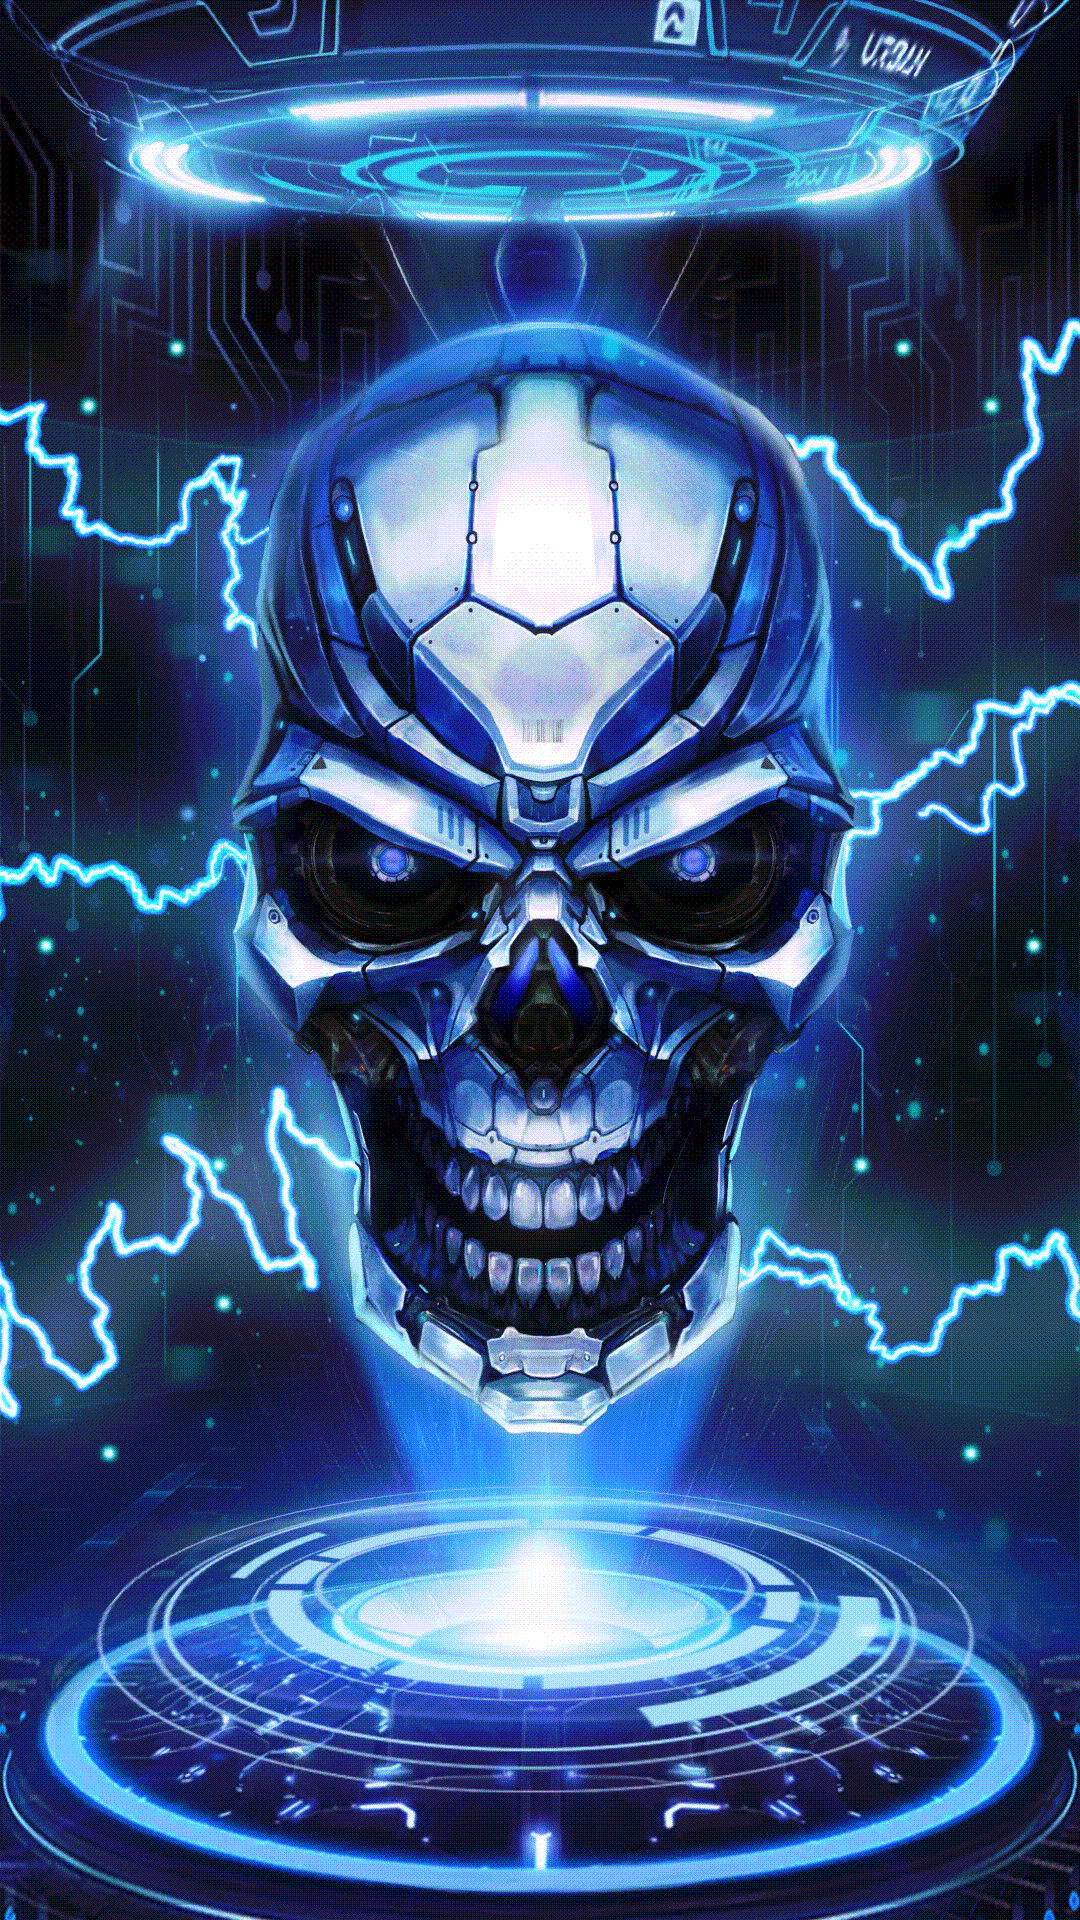 Cool Skull Backgrounds Neon Here You Can Find The Best Cute Skull Wallpapers Uploaded By Our